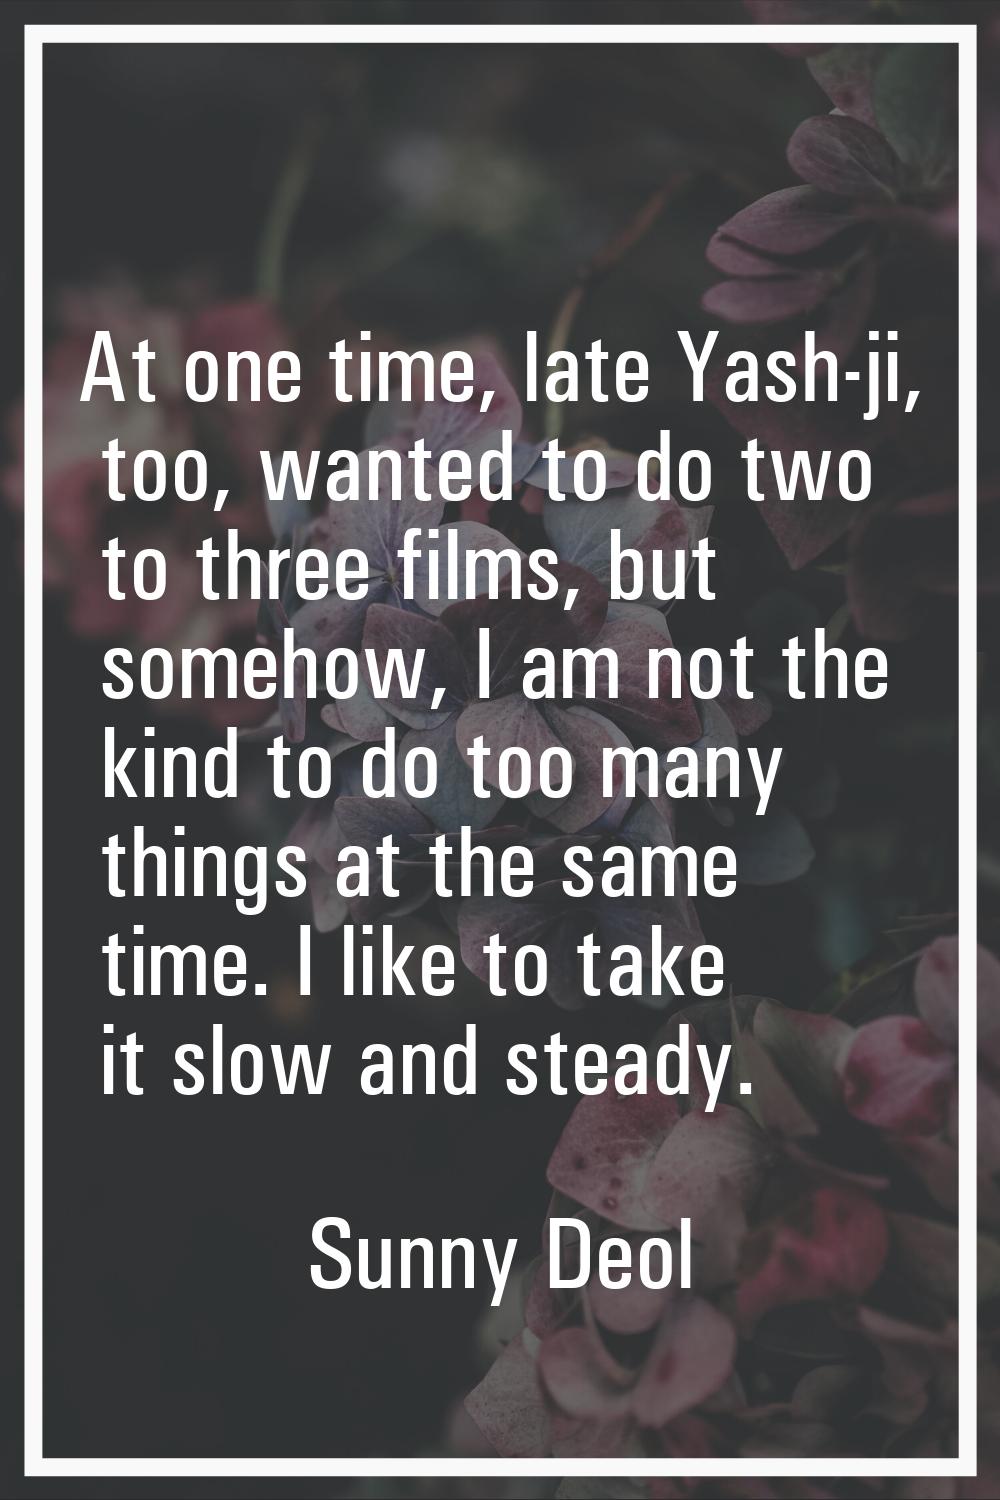 At one time, late Yash-ji, too, wanted to do two to three films, but somehow, I am not the kind to 